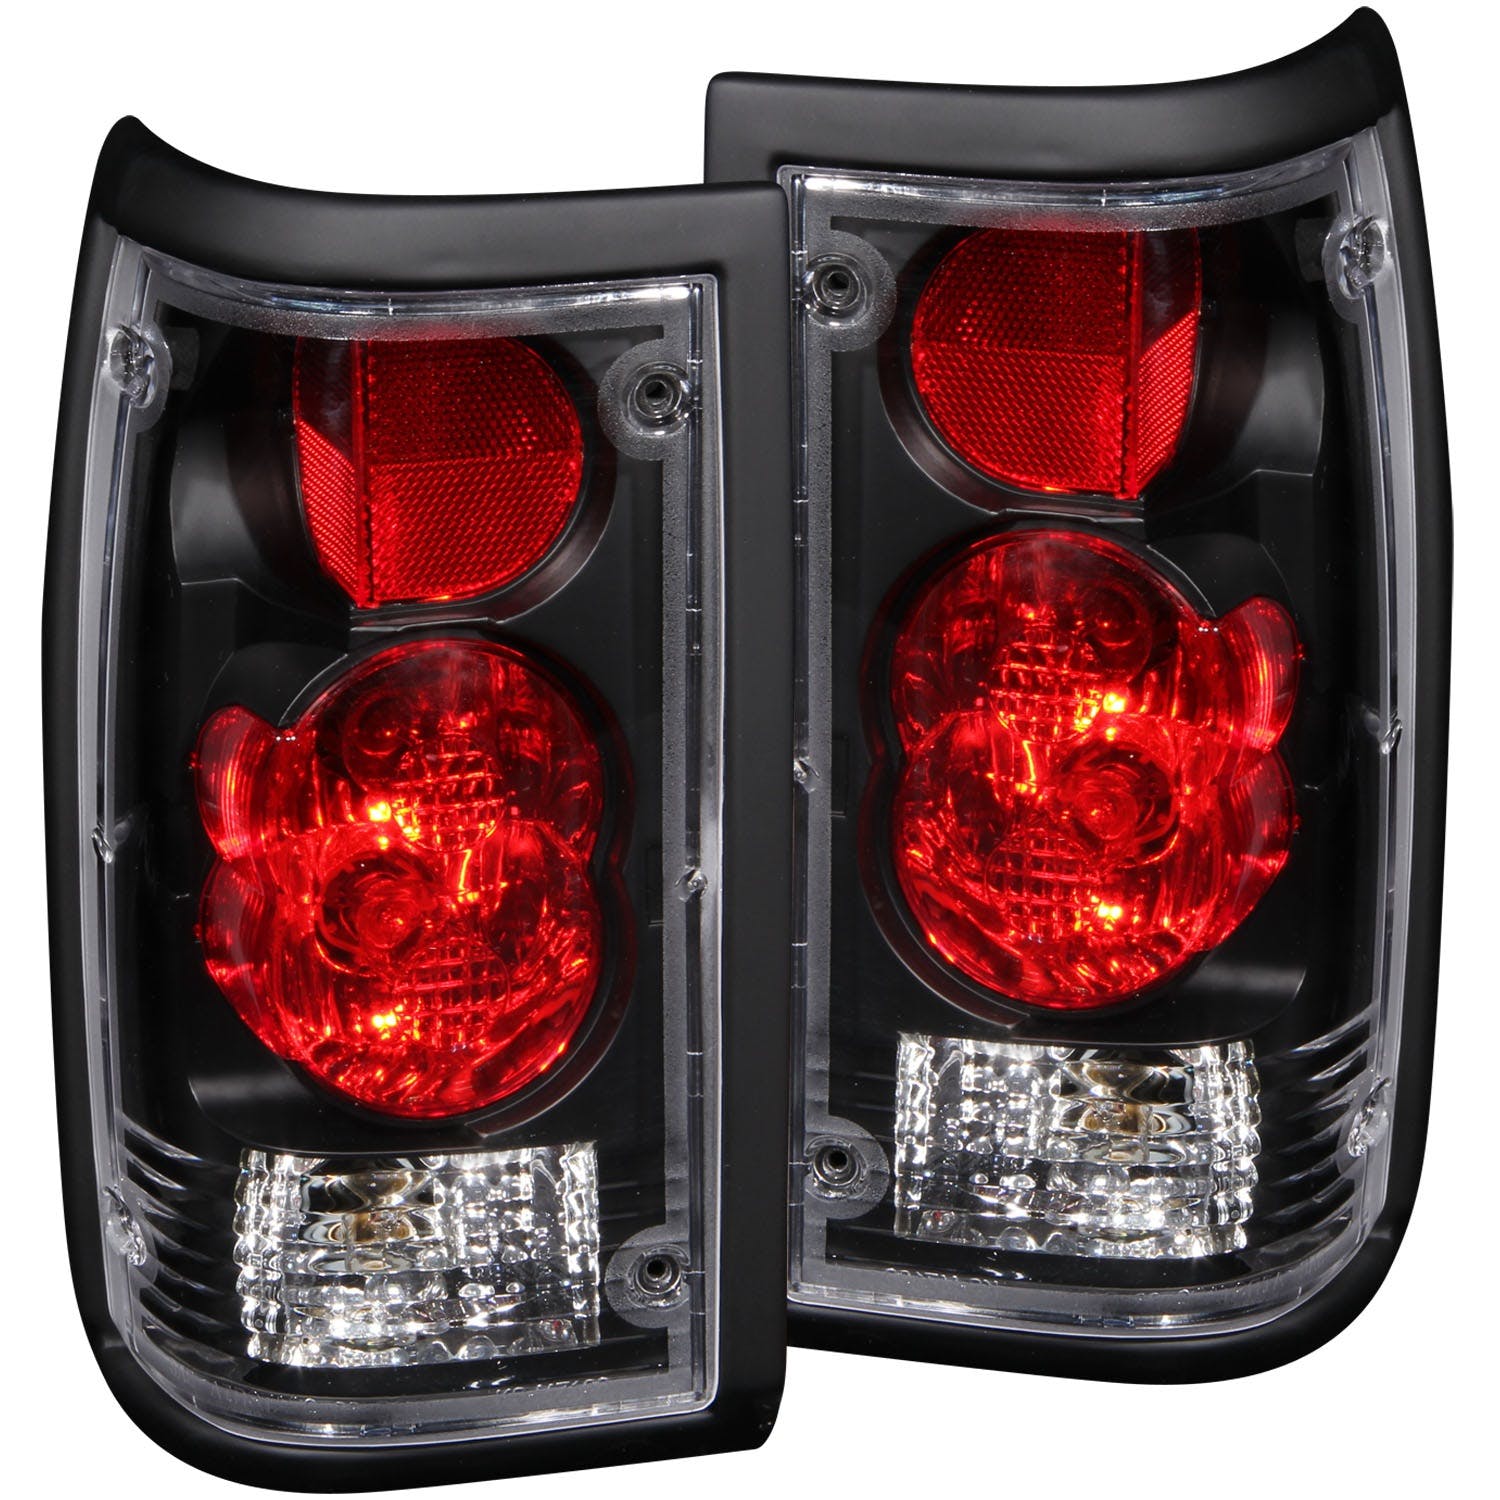 AnzoUSA 211113 Taillights Black